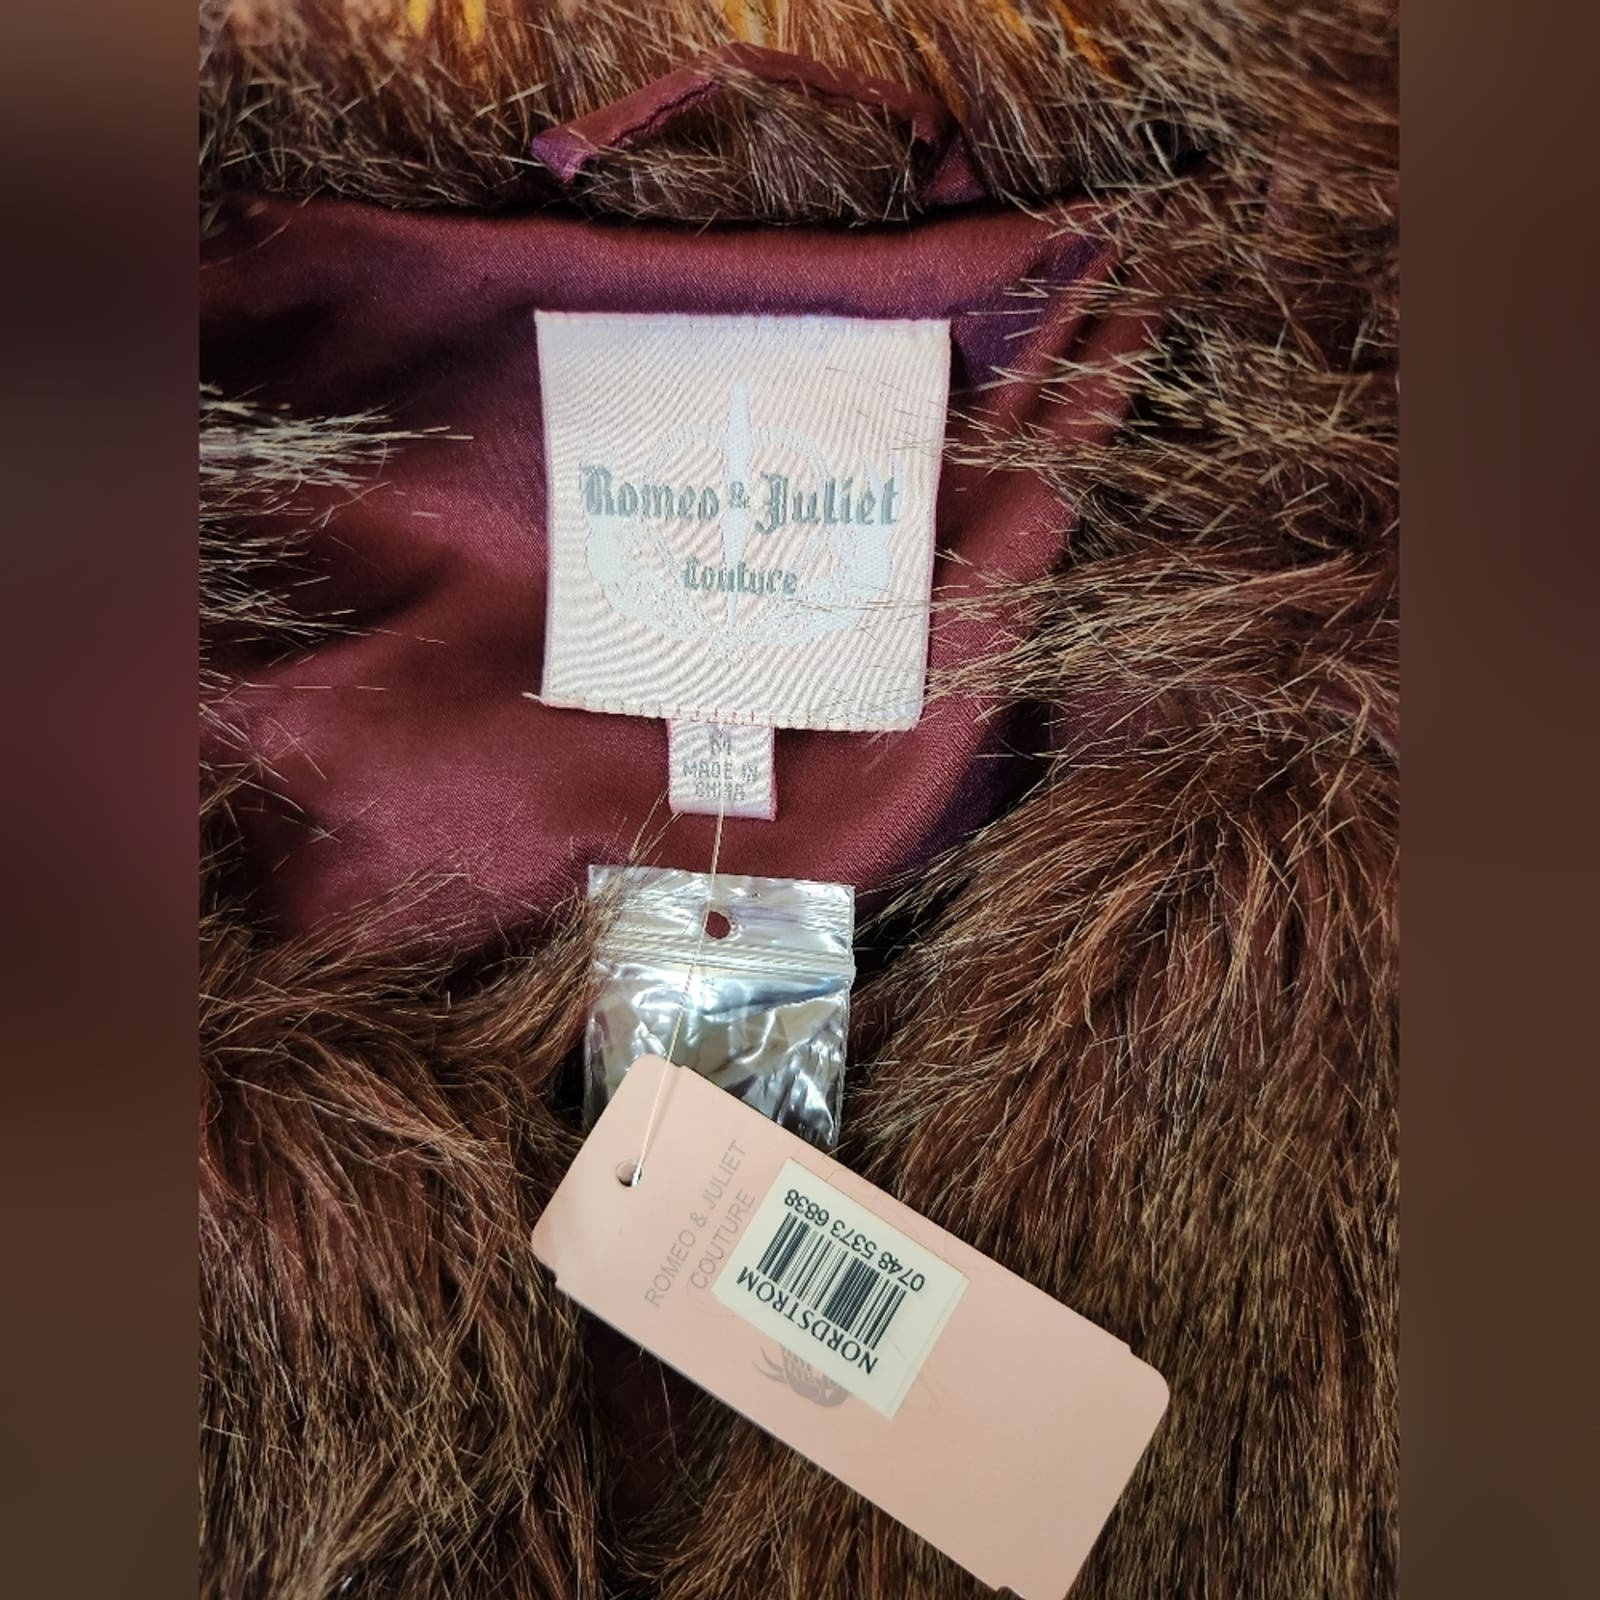 reasonable price NWT Romeo & Juliet Couture faux fur strong shoulder vest Medium pquCu0nYK no tax